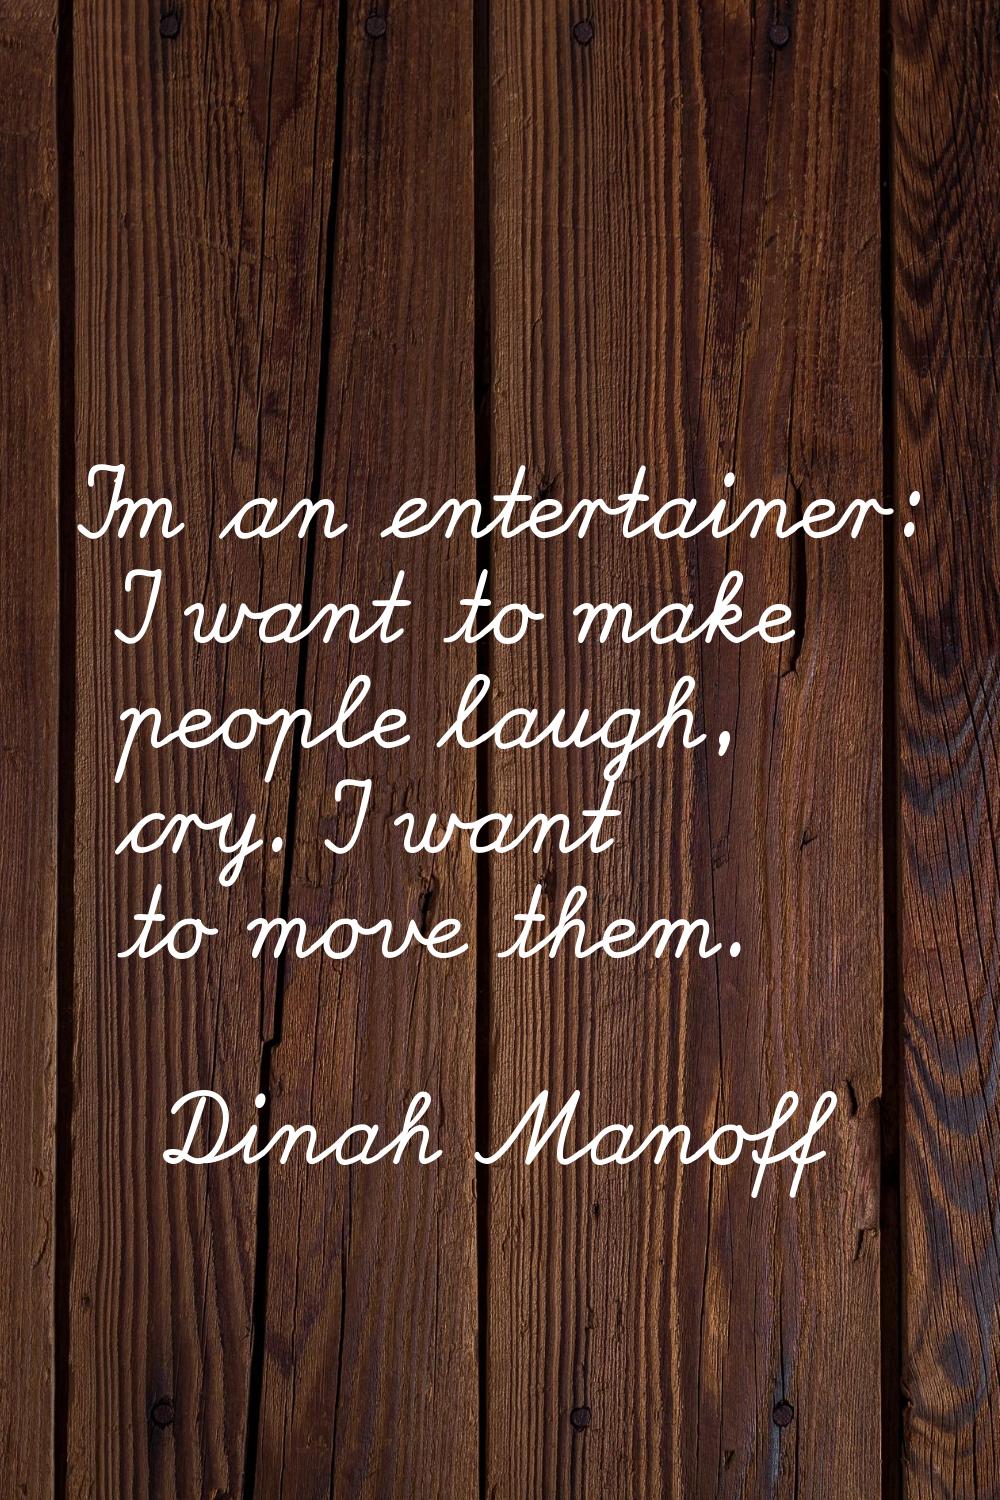 I'm an entertainer: I want to make people laugh, cry. I want to move them.